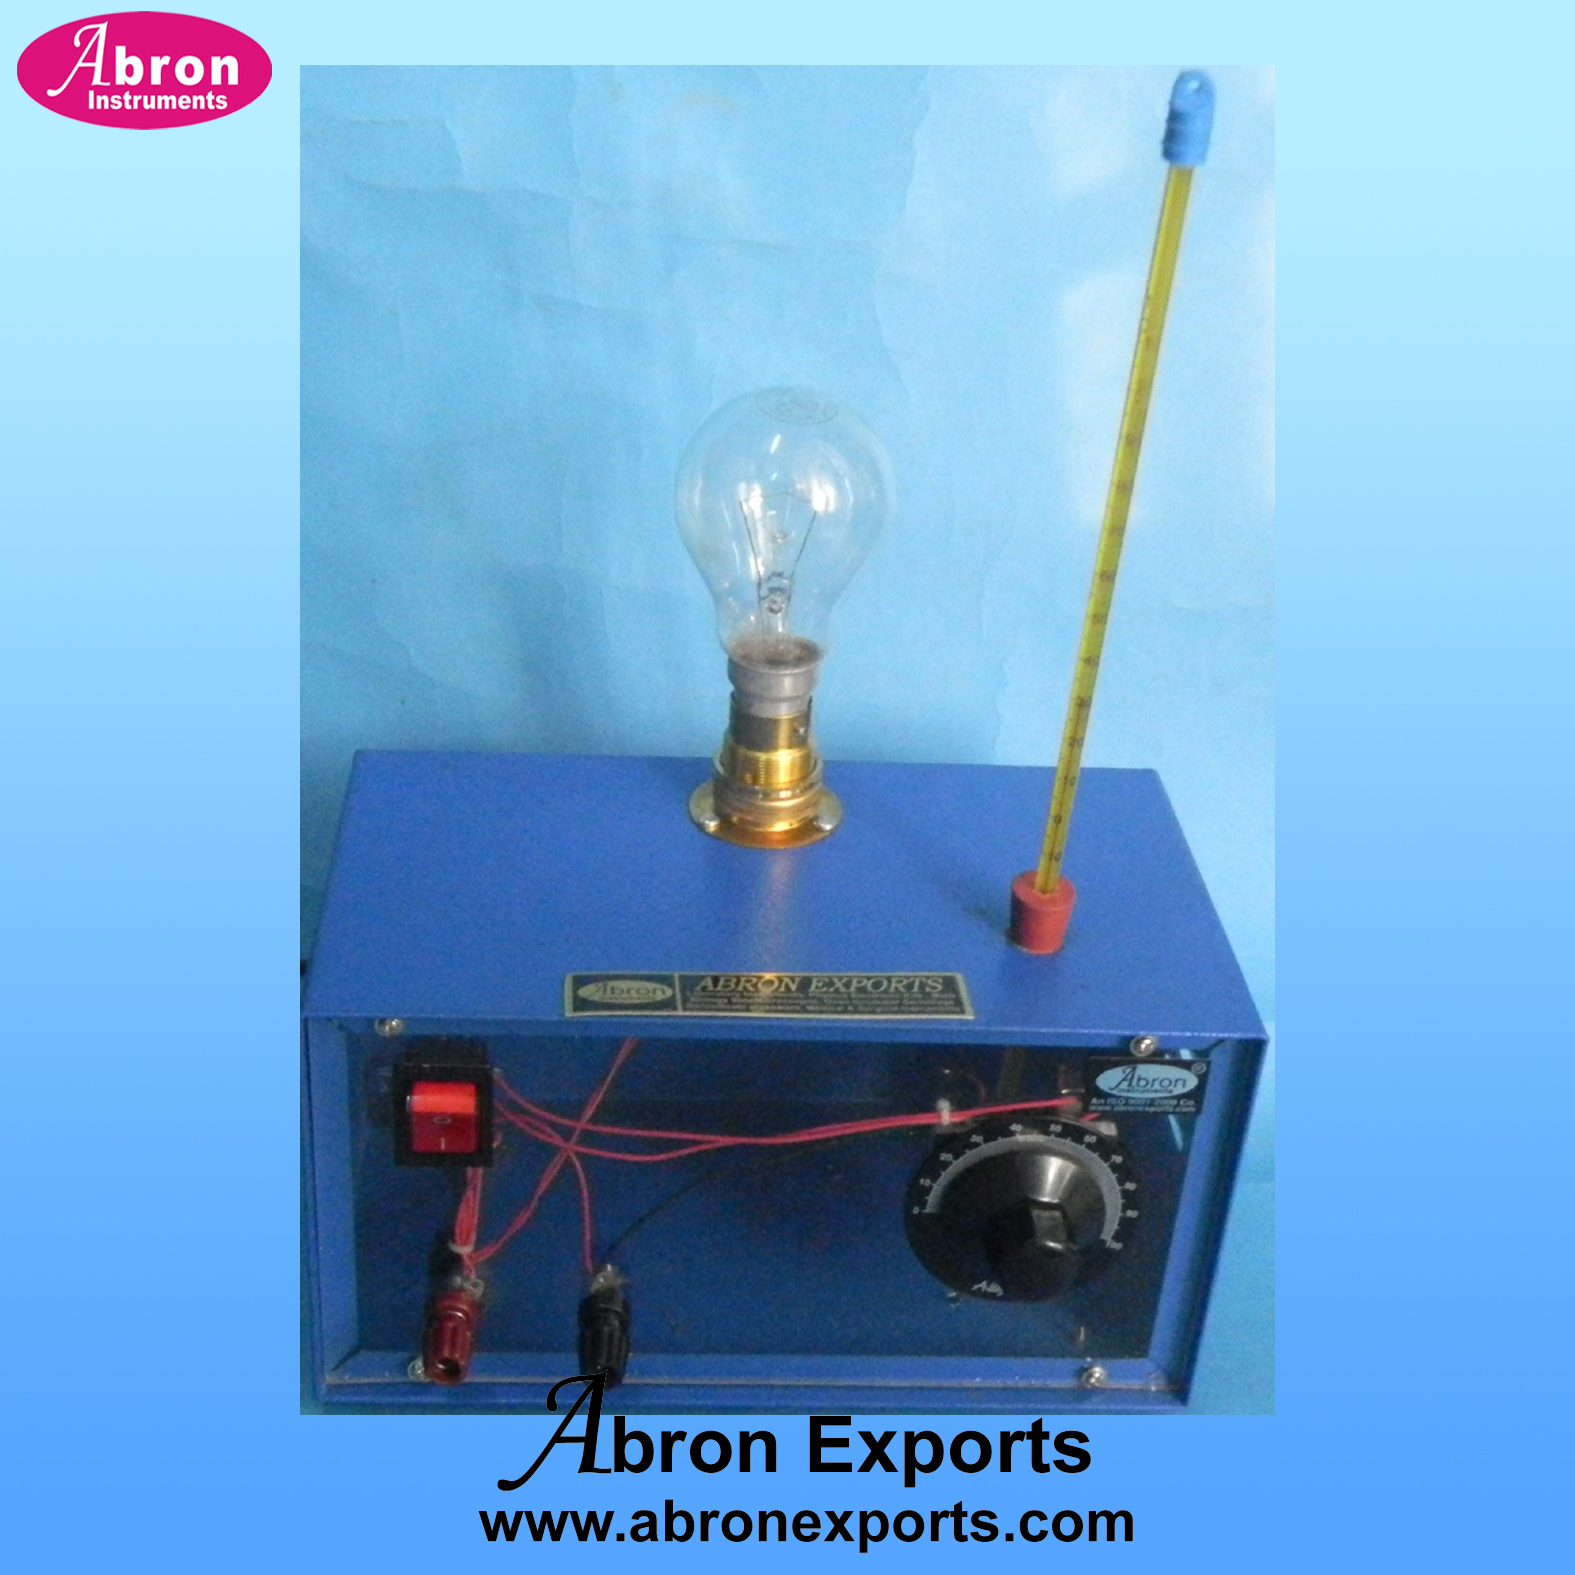 Model working thermostst with energy regulator trainer box with thermometer bulb abron AP-800TH